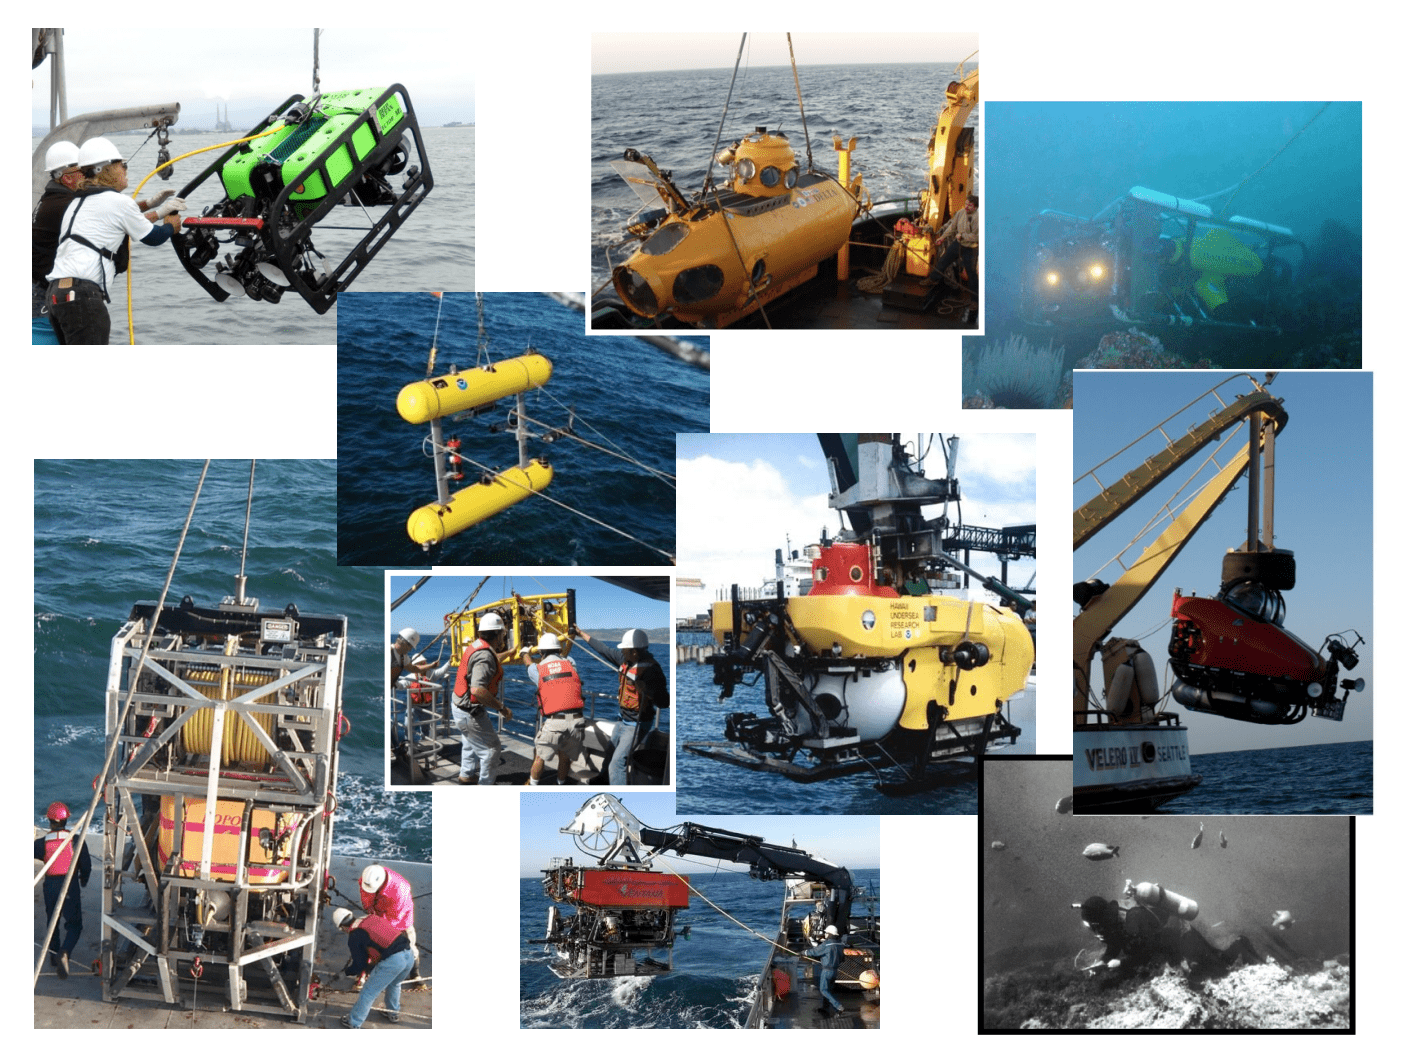 June 2015 - A COMPARATIVE ASSESSMENT OF UNDERWATER VISUAL SURVEY TOOLS: 41